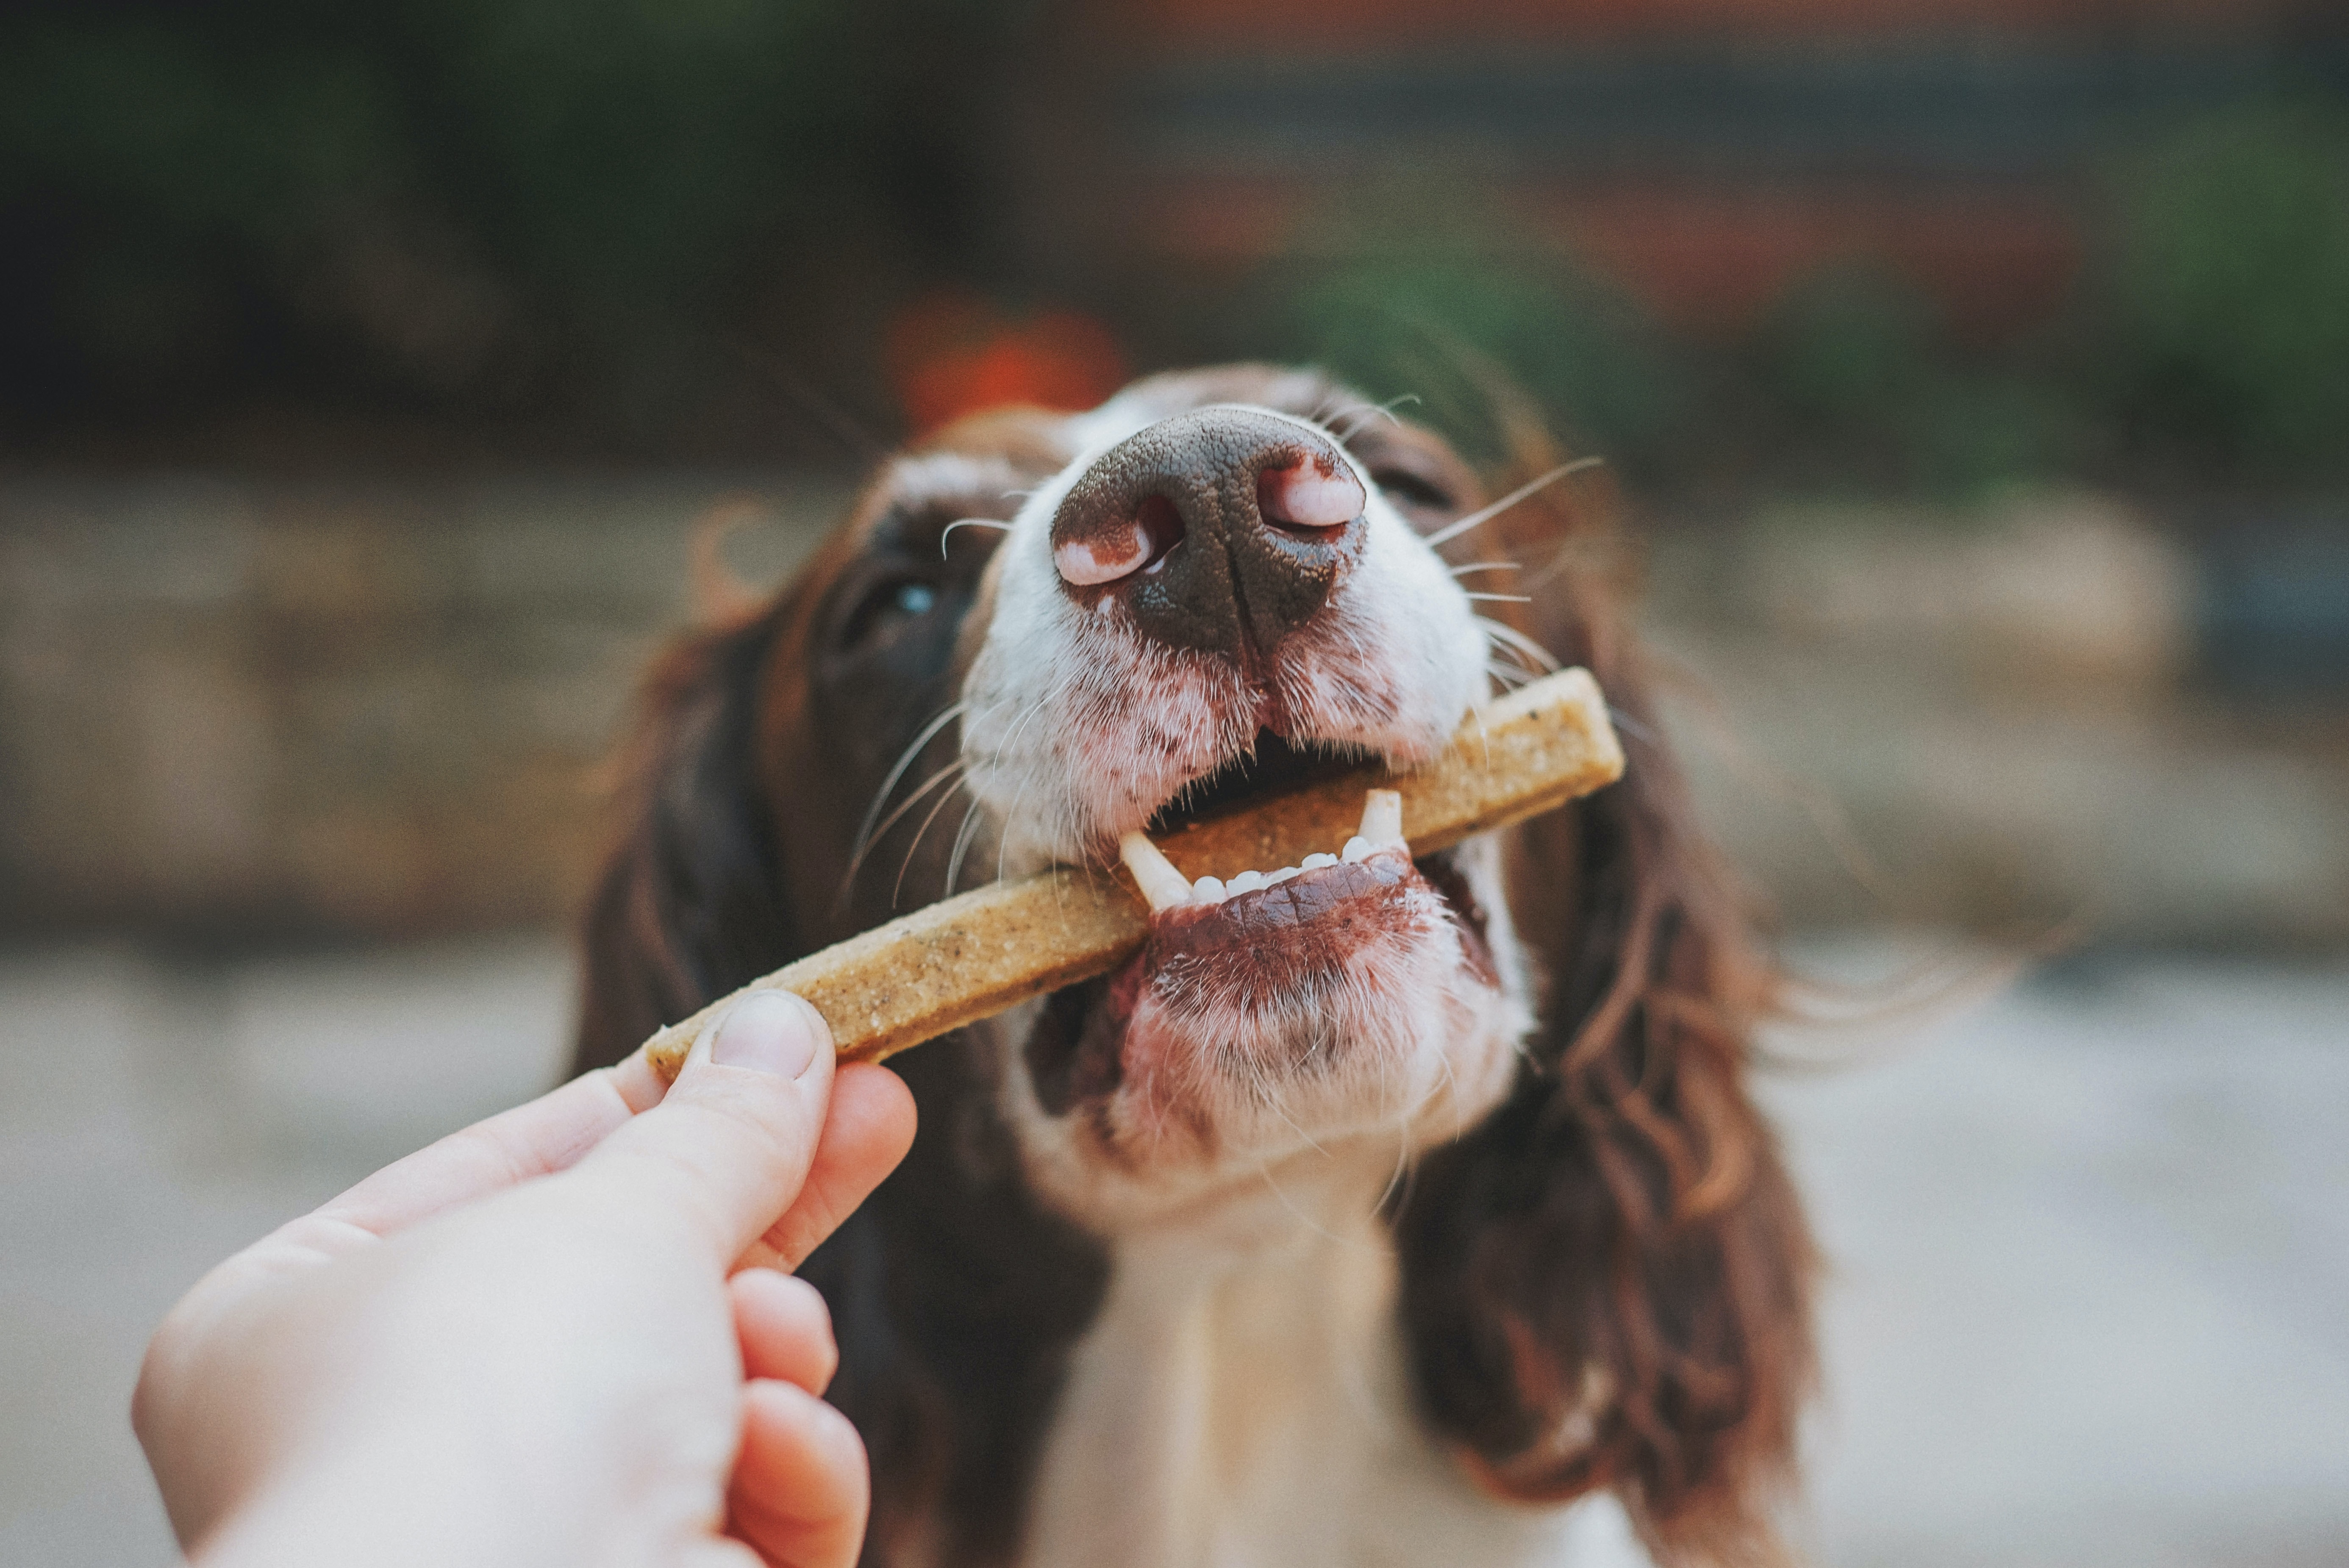 Cocker spaniel dog taking a treat bone from person's hand